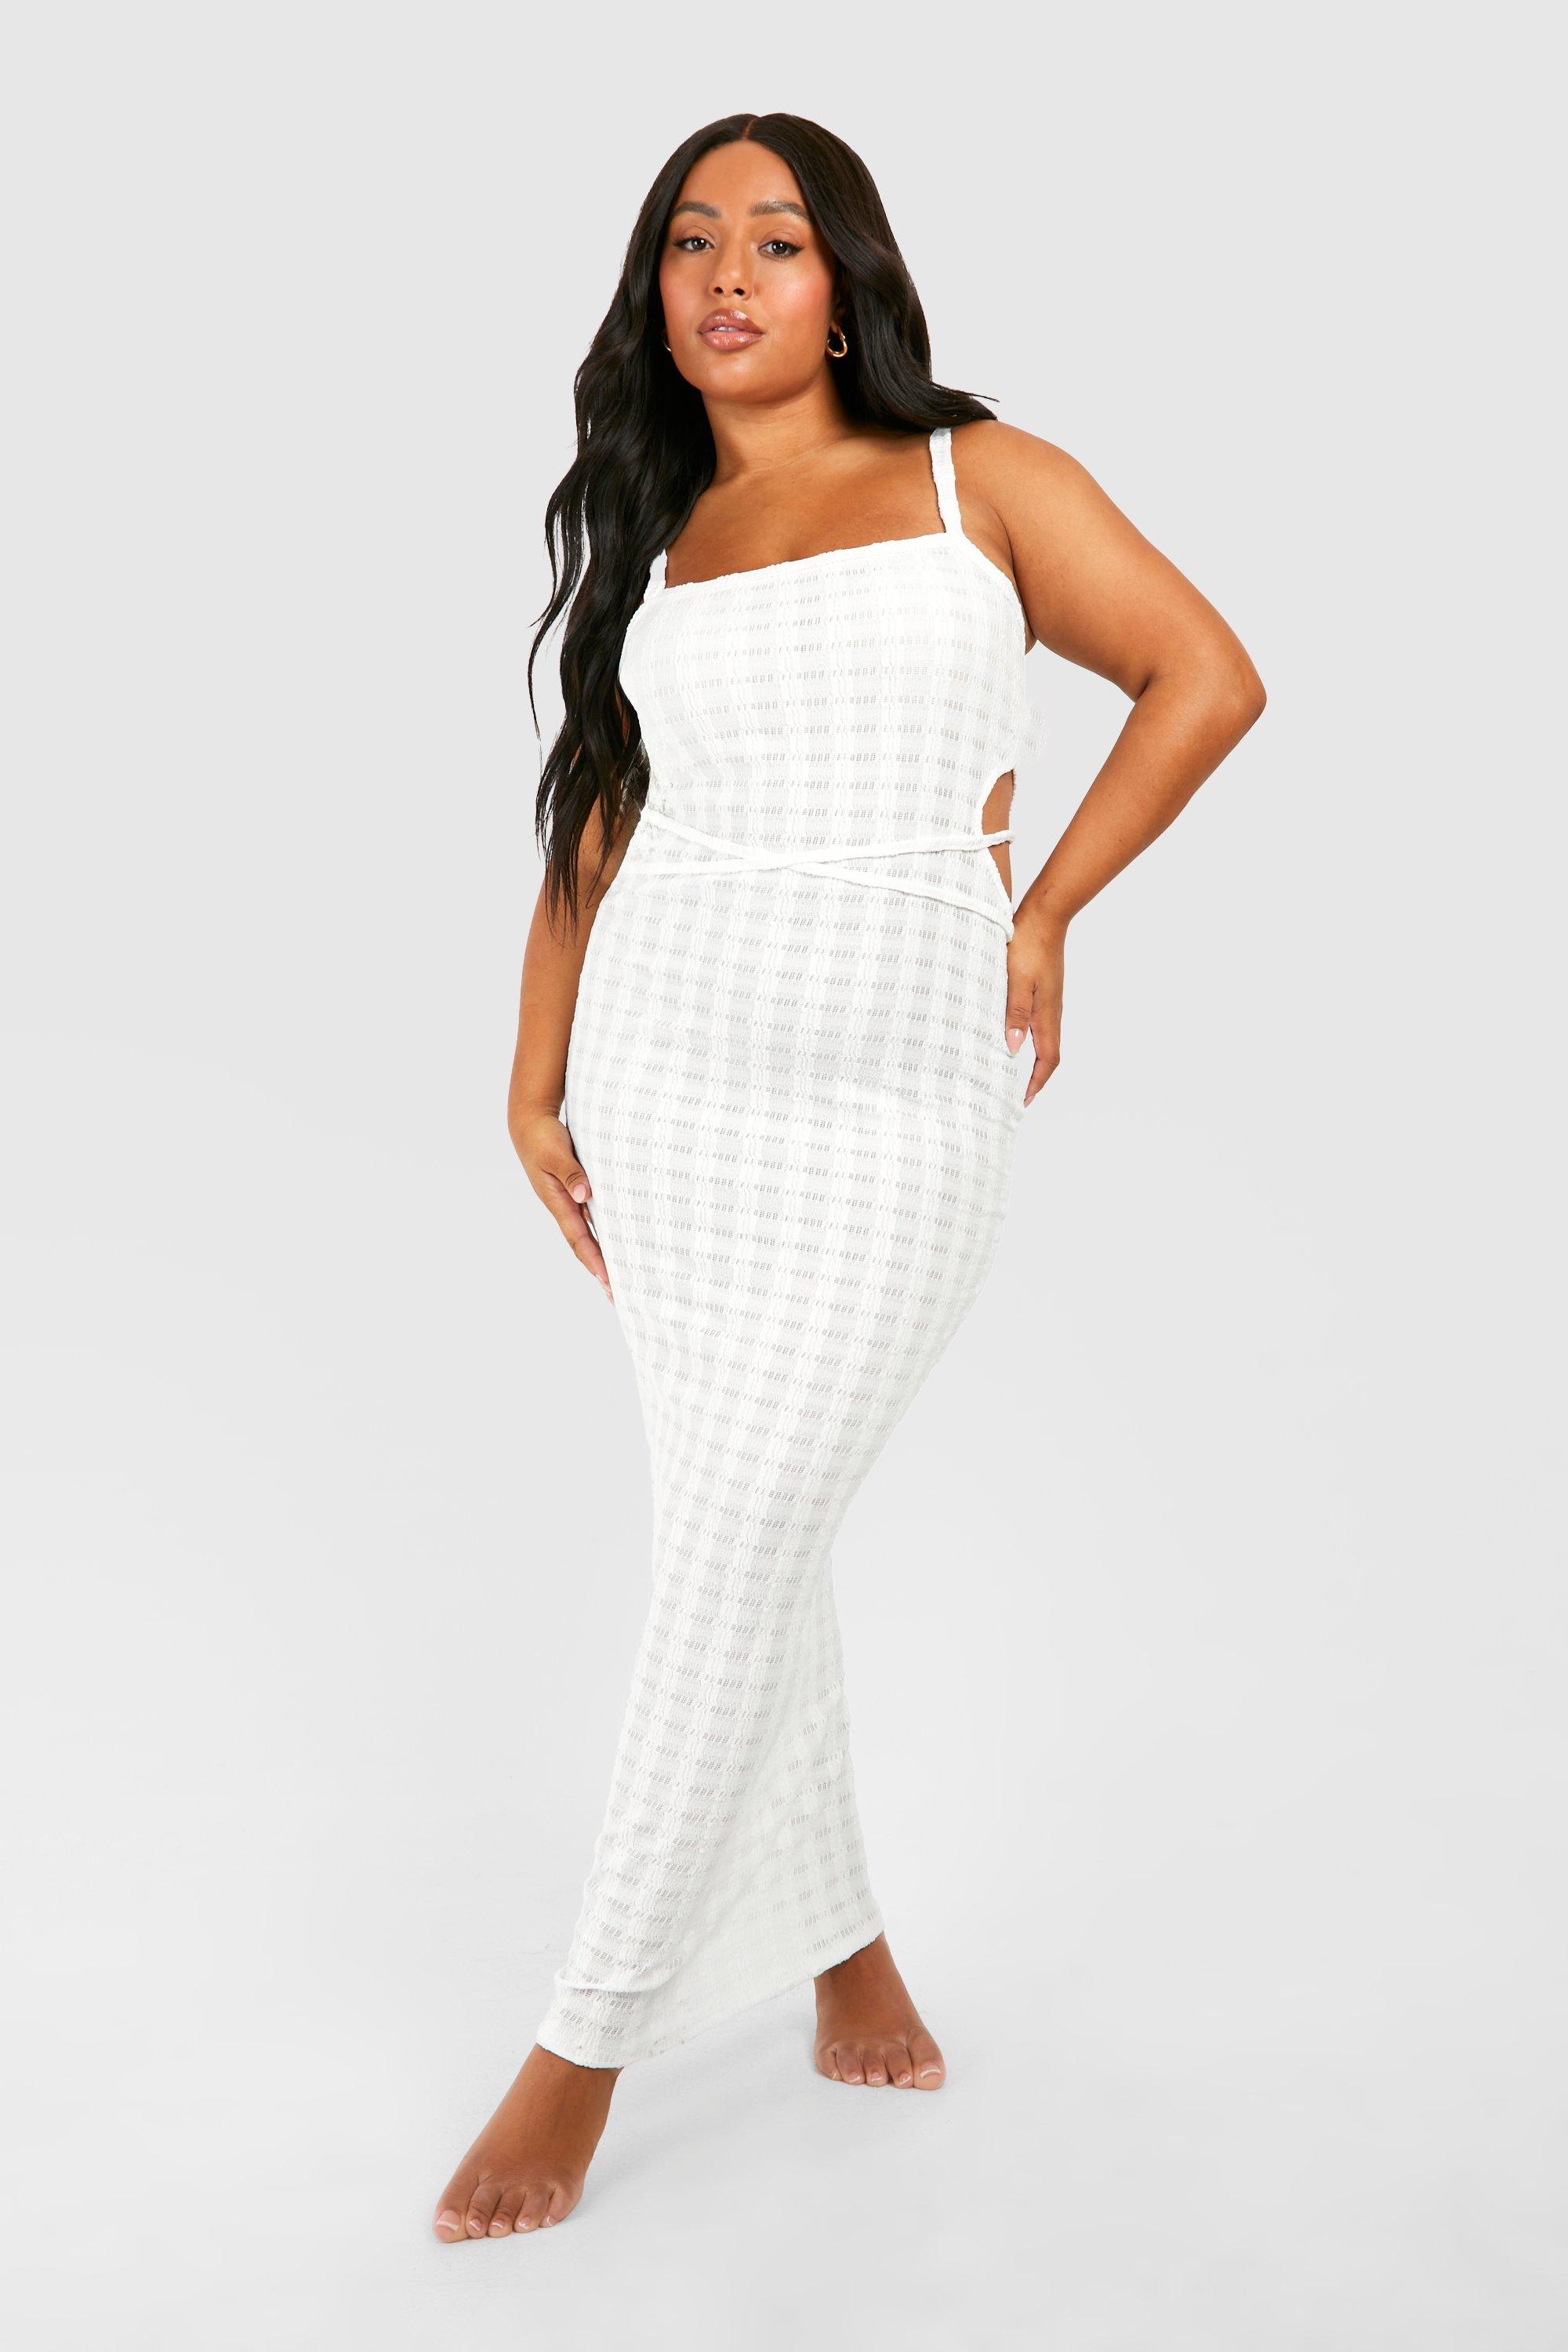 Boohoo Plus Jersey Knitted Cut Out Beach Maxi Dress, White